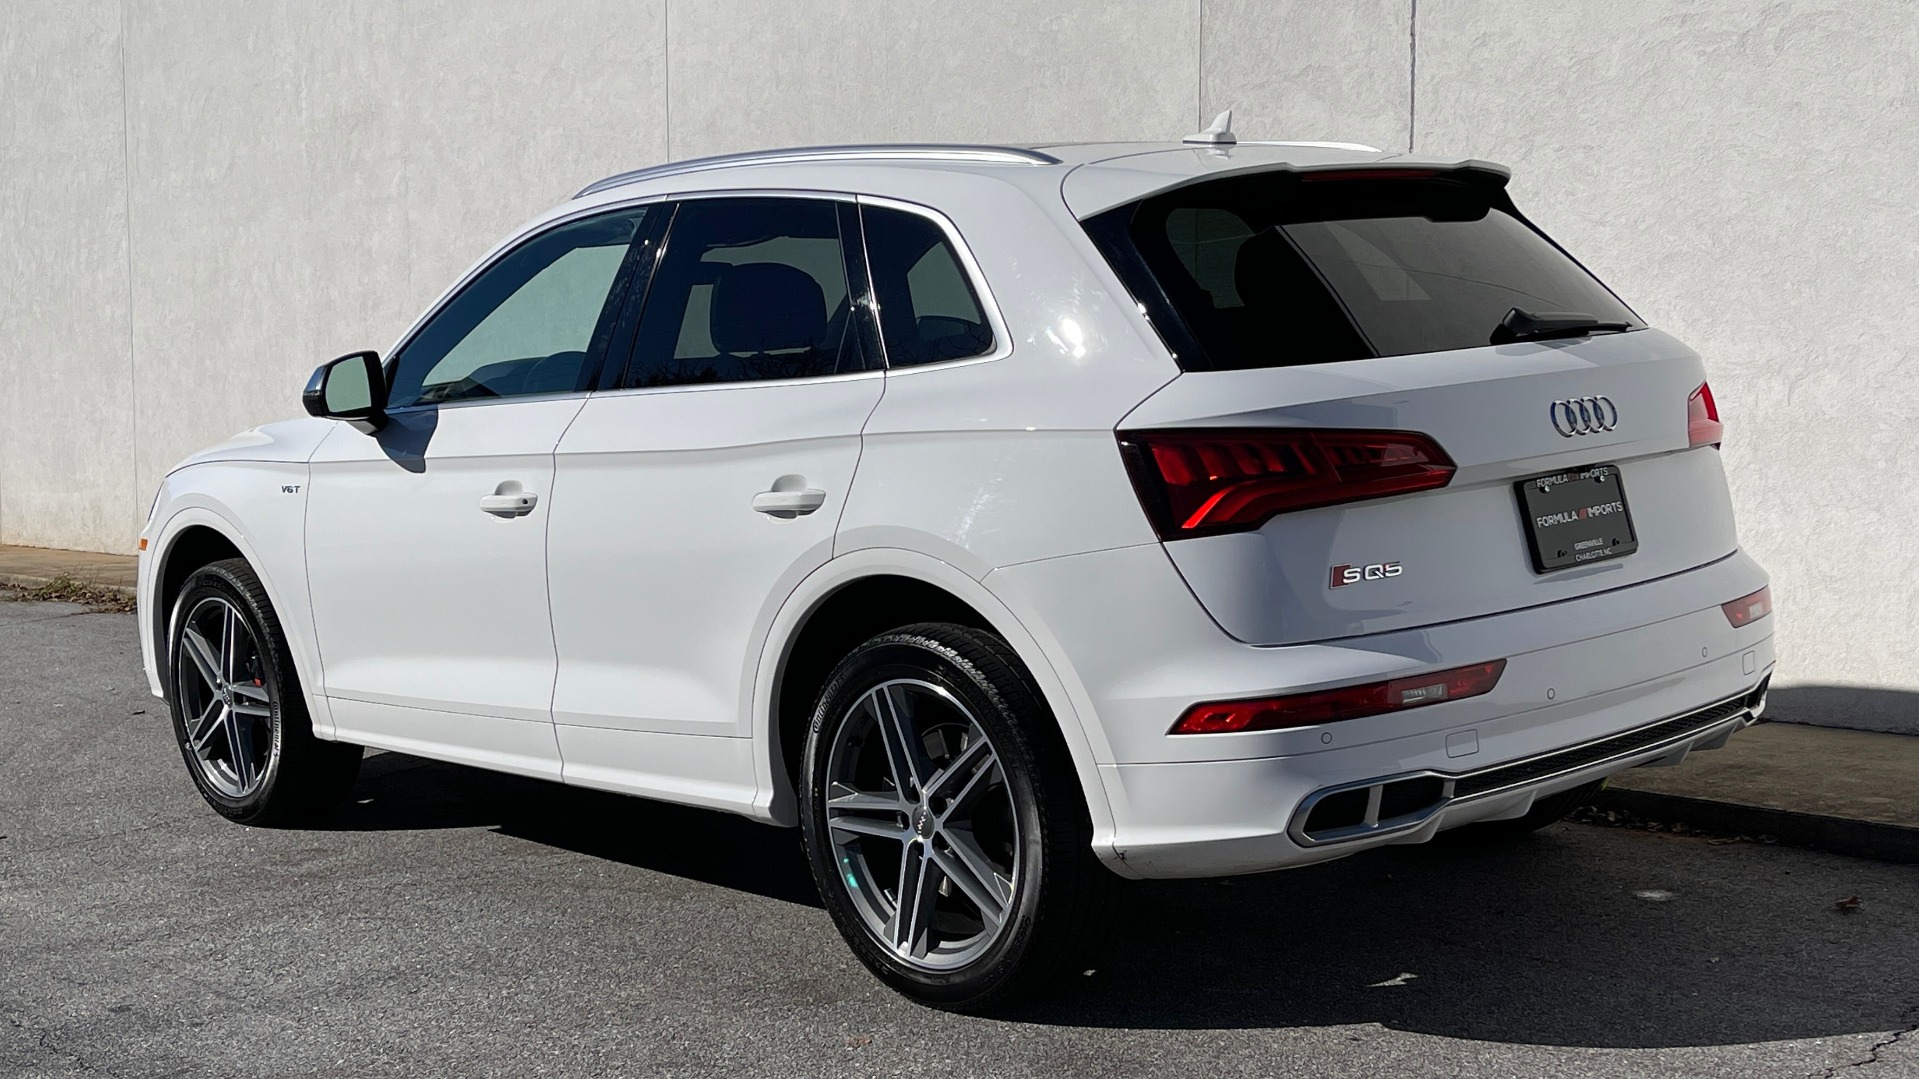 Used 2018 Audi SQ5 PREMIUM PLUS / NAV / SUNROOF / 12.3IN SCREEN / REARVIEW for sale $46,795 at Formula Imports in Charlotte NC 28227 4